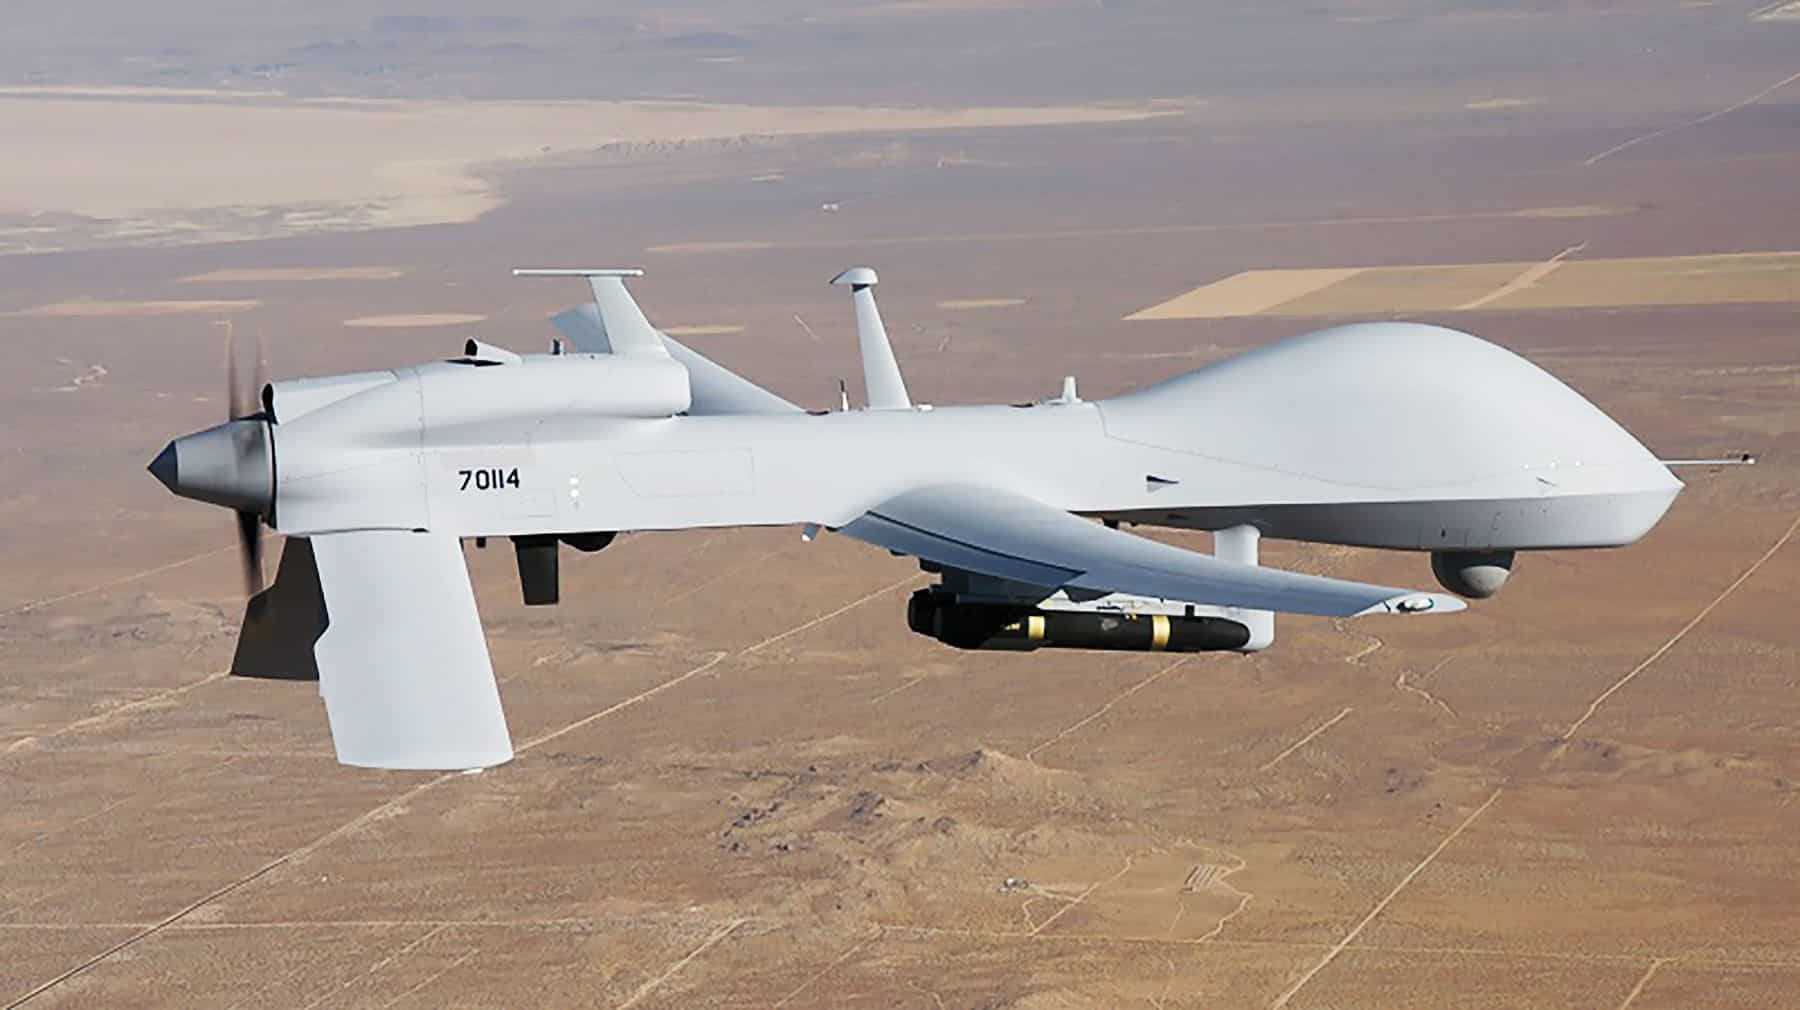 Current large UAS platforms like this Gray Eagle provide important capabilities but need a runway to take off. These systems also have lower airspeeds and depend on data links and GPS signals. Future systems will need to be more independent to operate in a complex battlespace. (Image courtesy of AMRDEC)